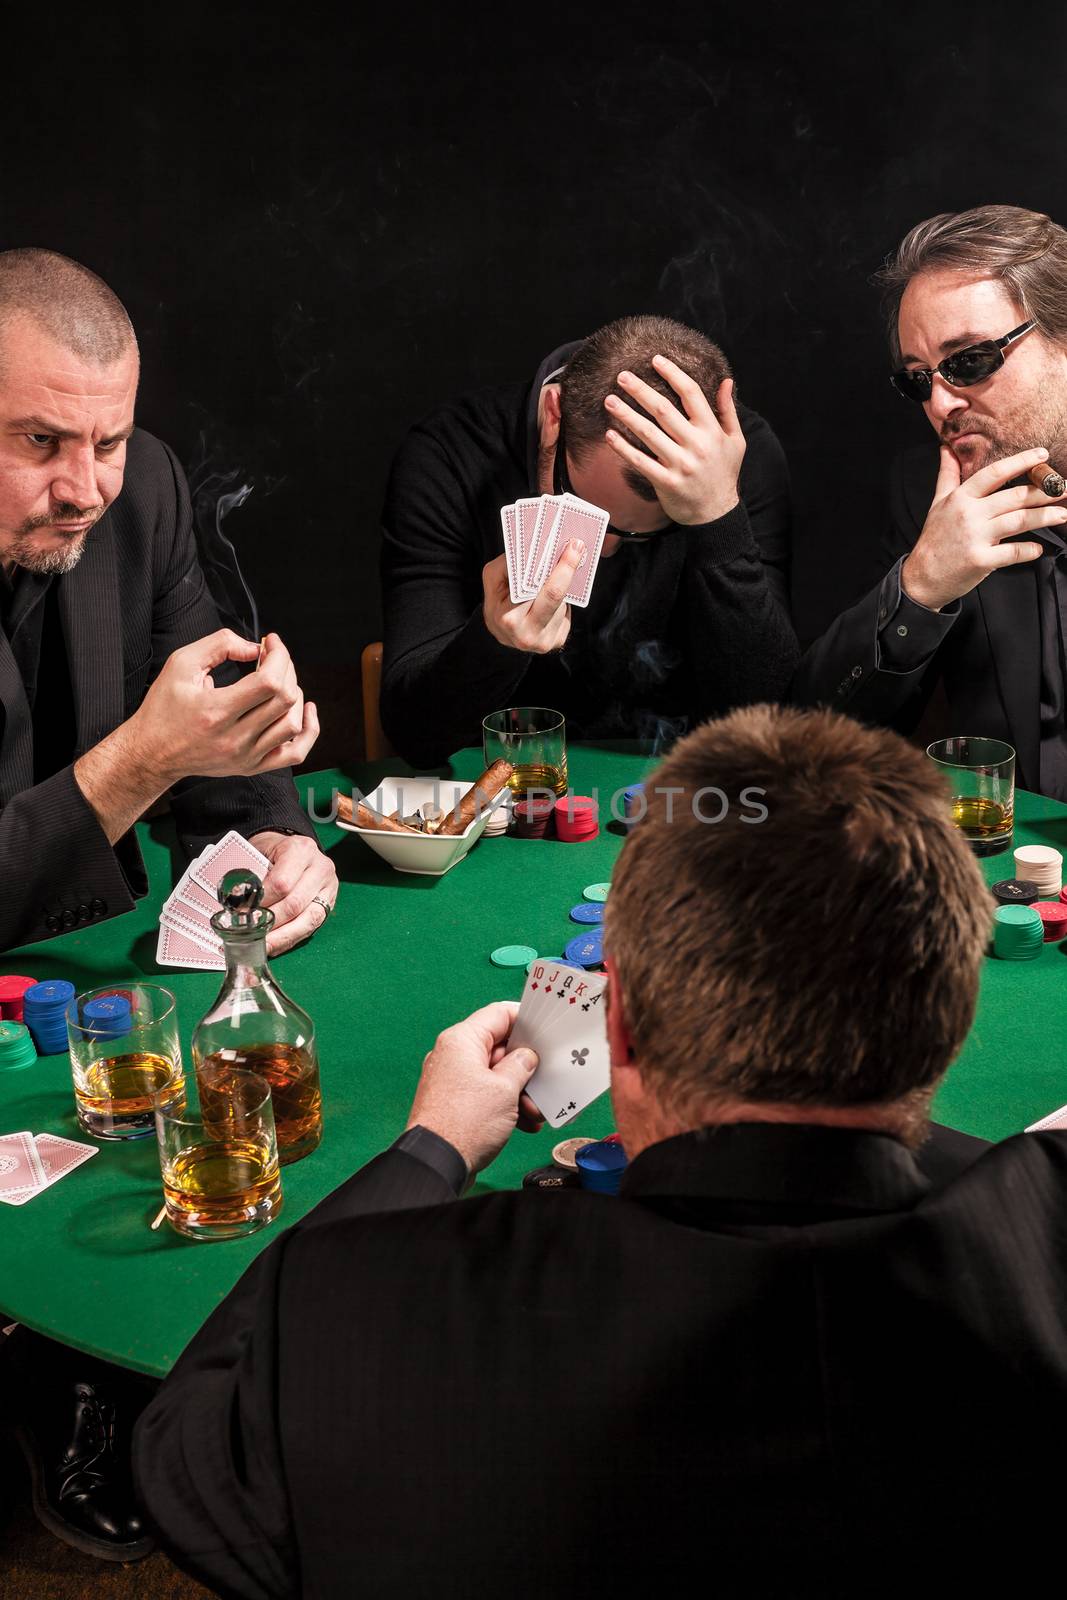 Photo of men playing poker, drinking and smoking, and looking uncertain of their luck.